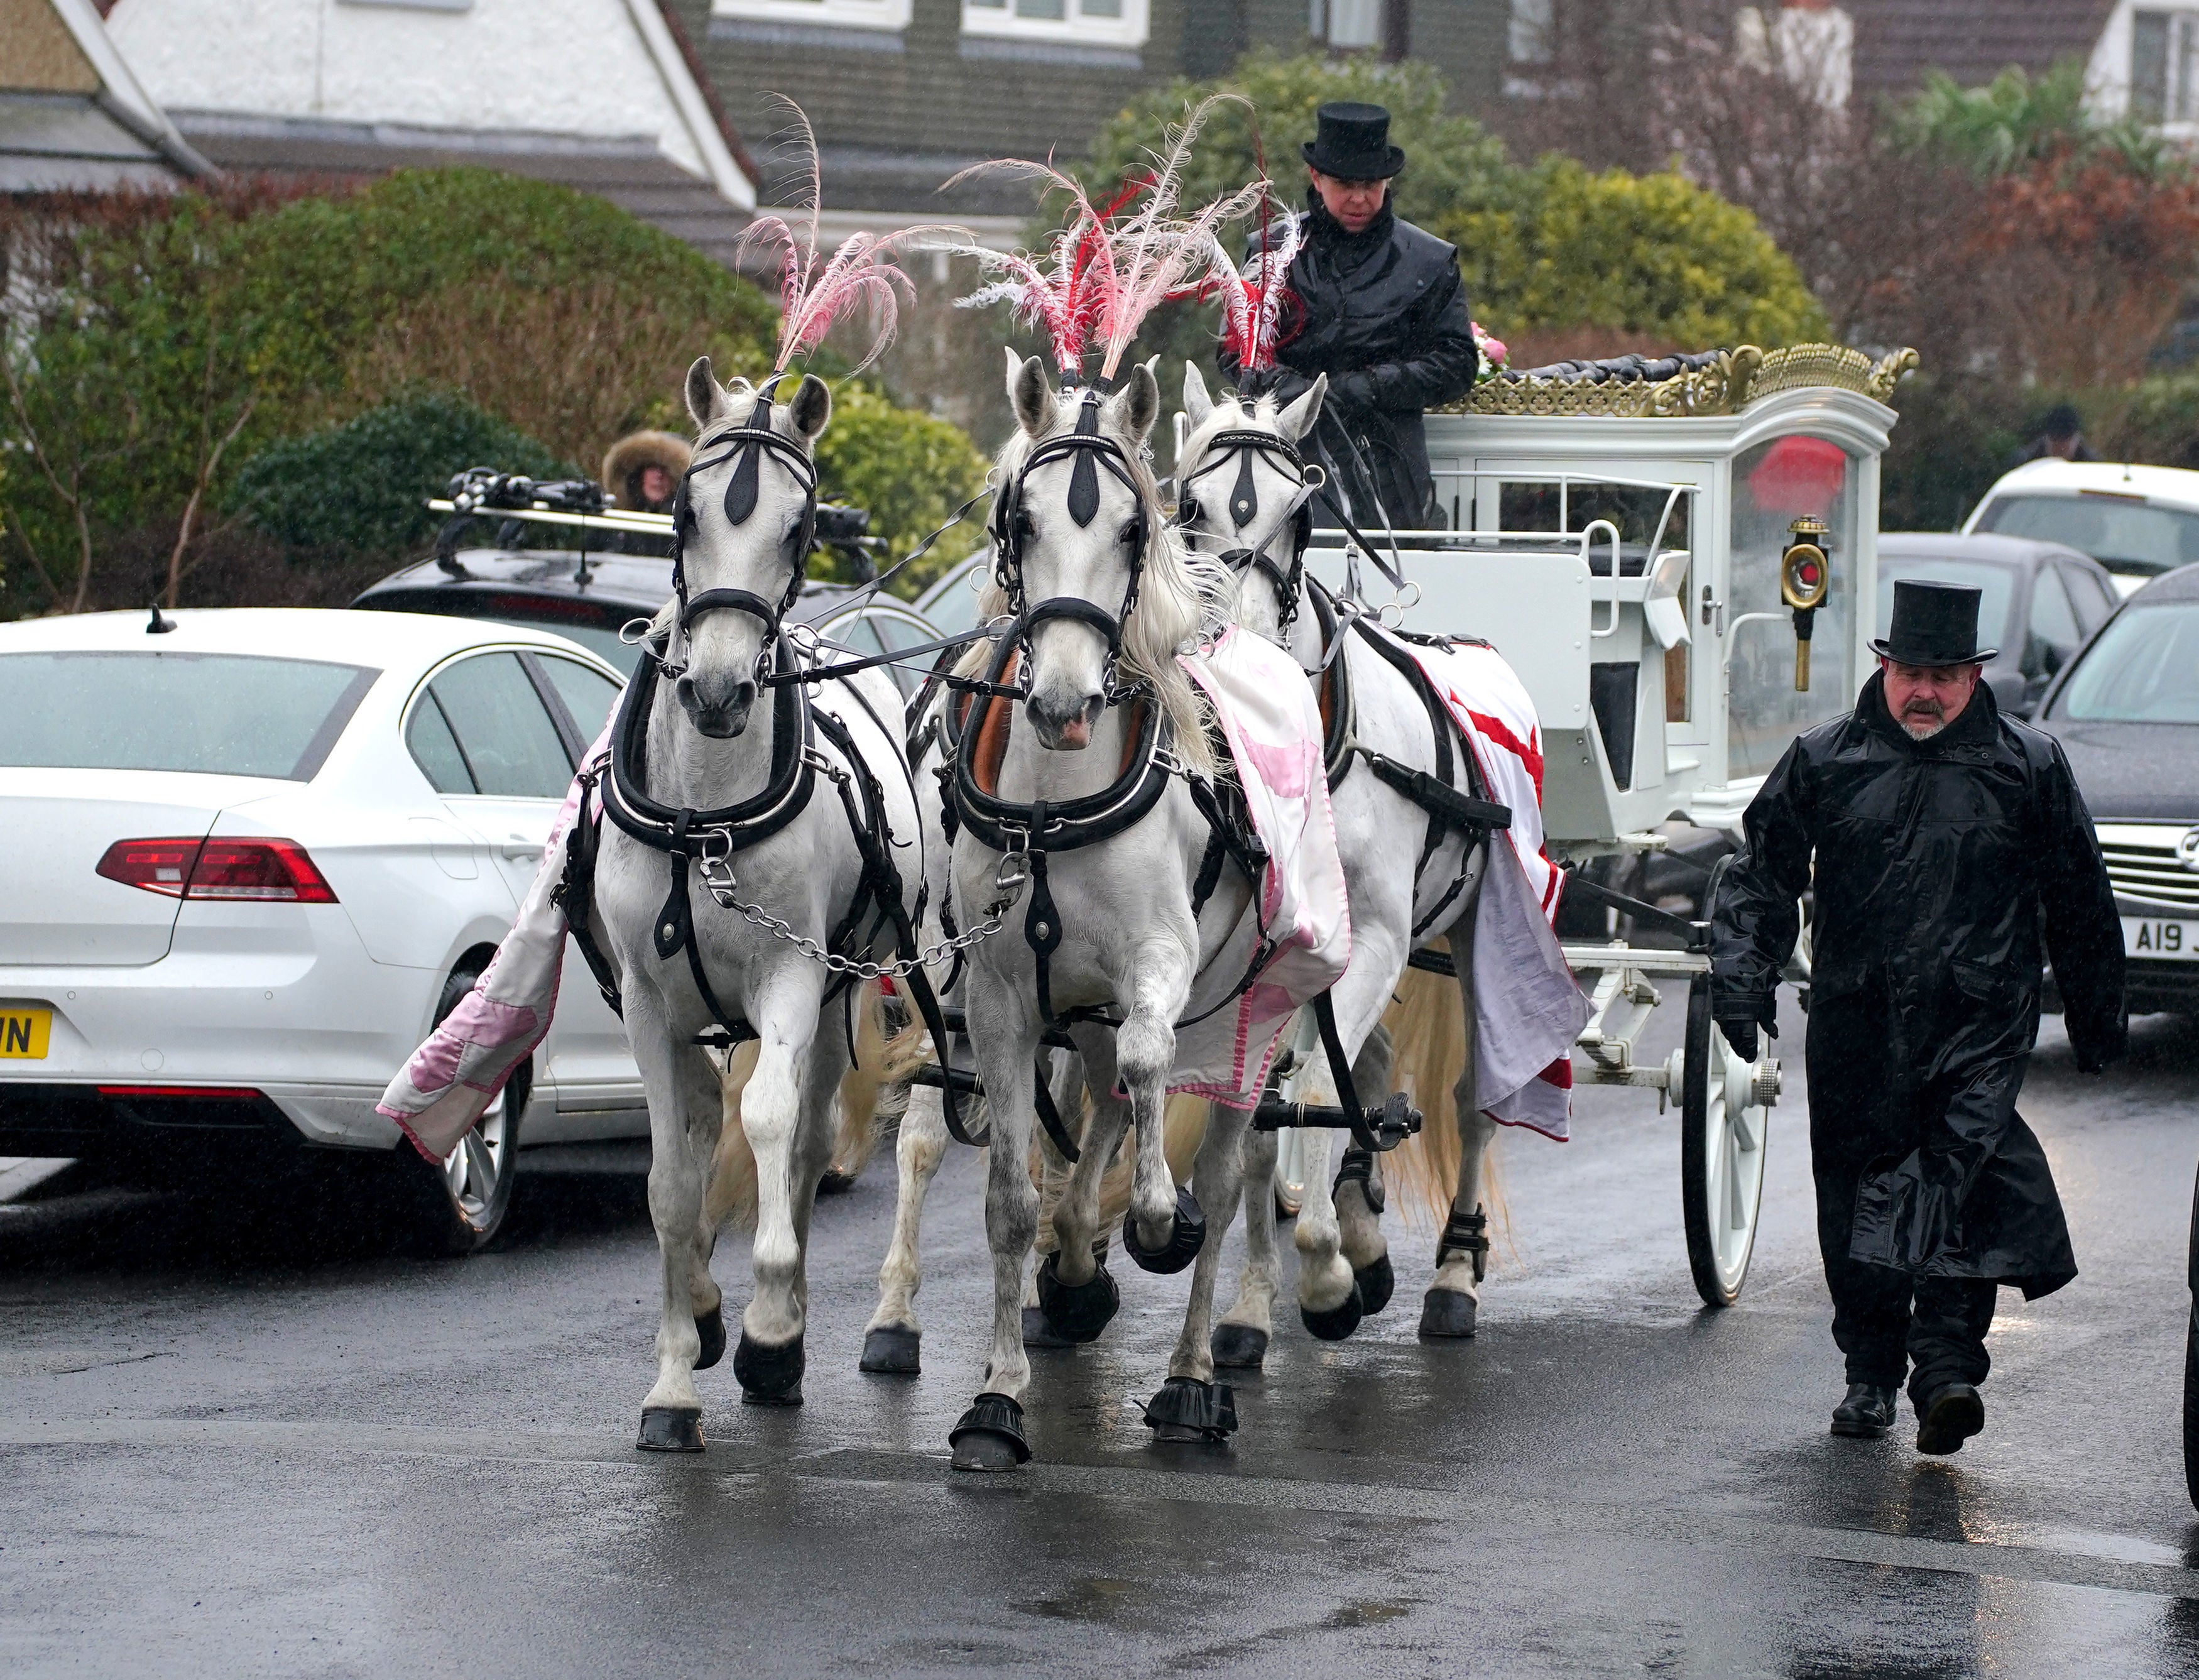 The funeral cortege for Ms Edwards arriving at St Nicholas's Church in Wallasey in January